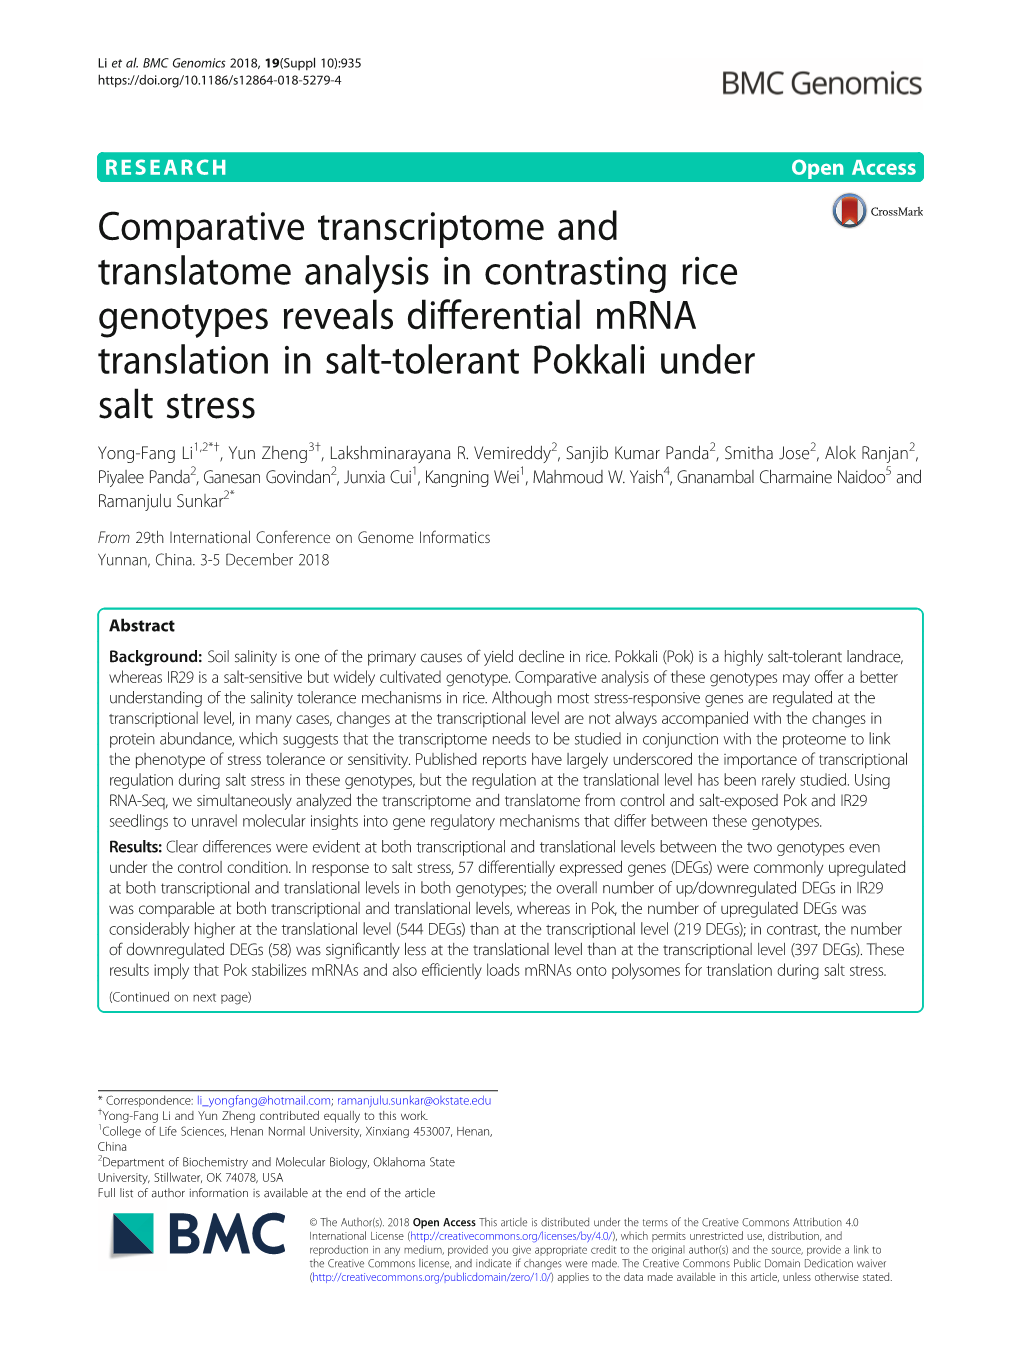 Comparative Transcriptome and Translatome Analysis in Contrasting